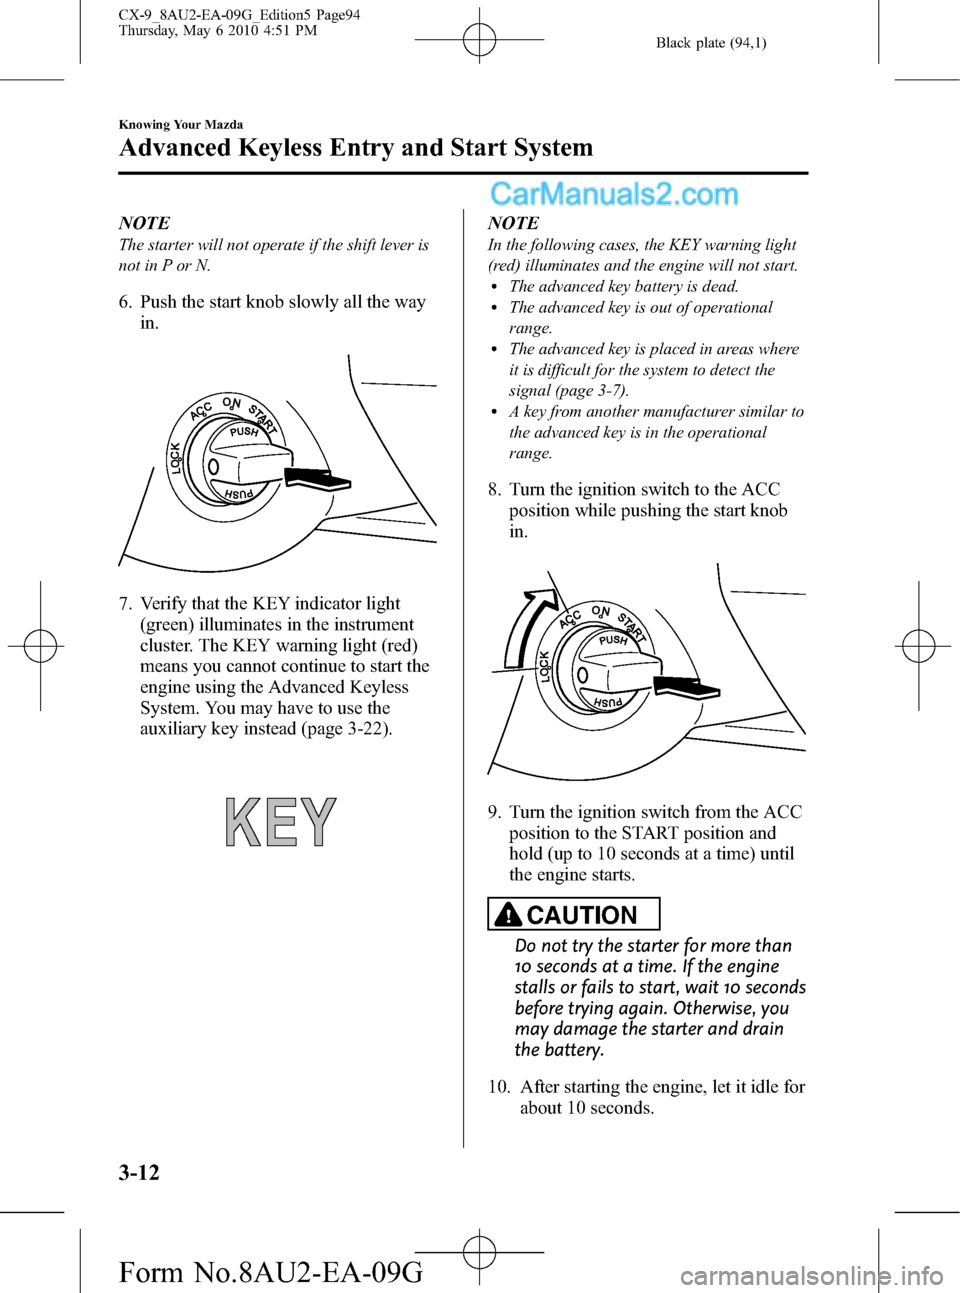 MAZDA MODEL CX-9 2010  Owners Manual (in English) Black plate (94,1)
NOTE
The starter will not operate if the shift lever is
not in P or N.
6. Push the start knob slowly all the way
in.
7. Verify that the KEY indicator light
(green) illuminates in th